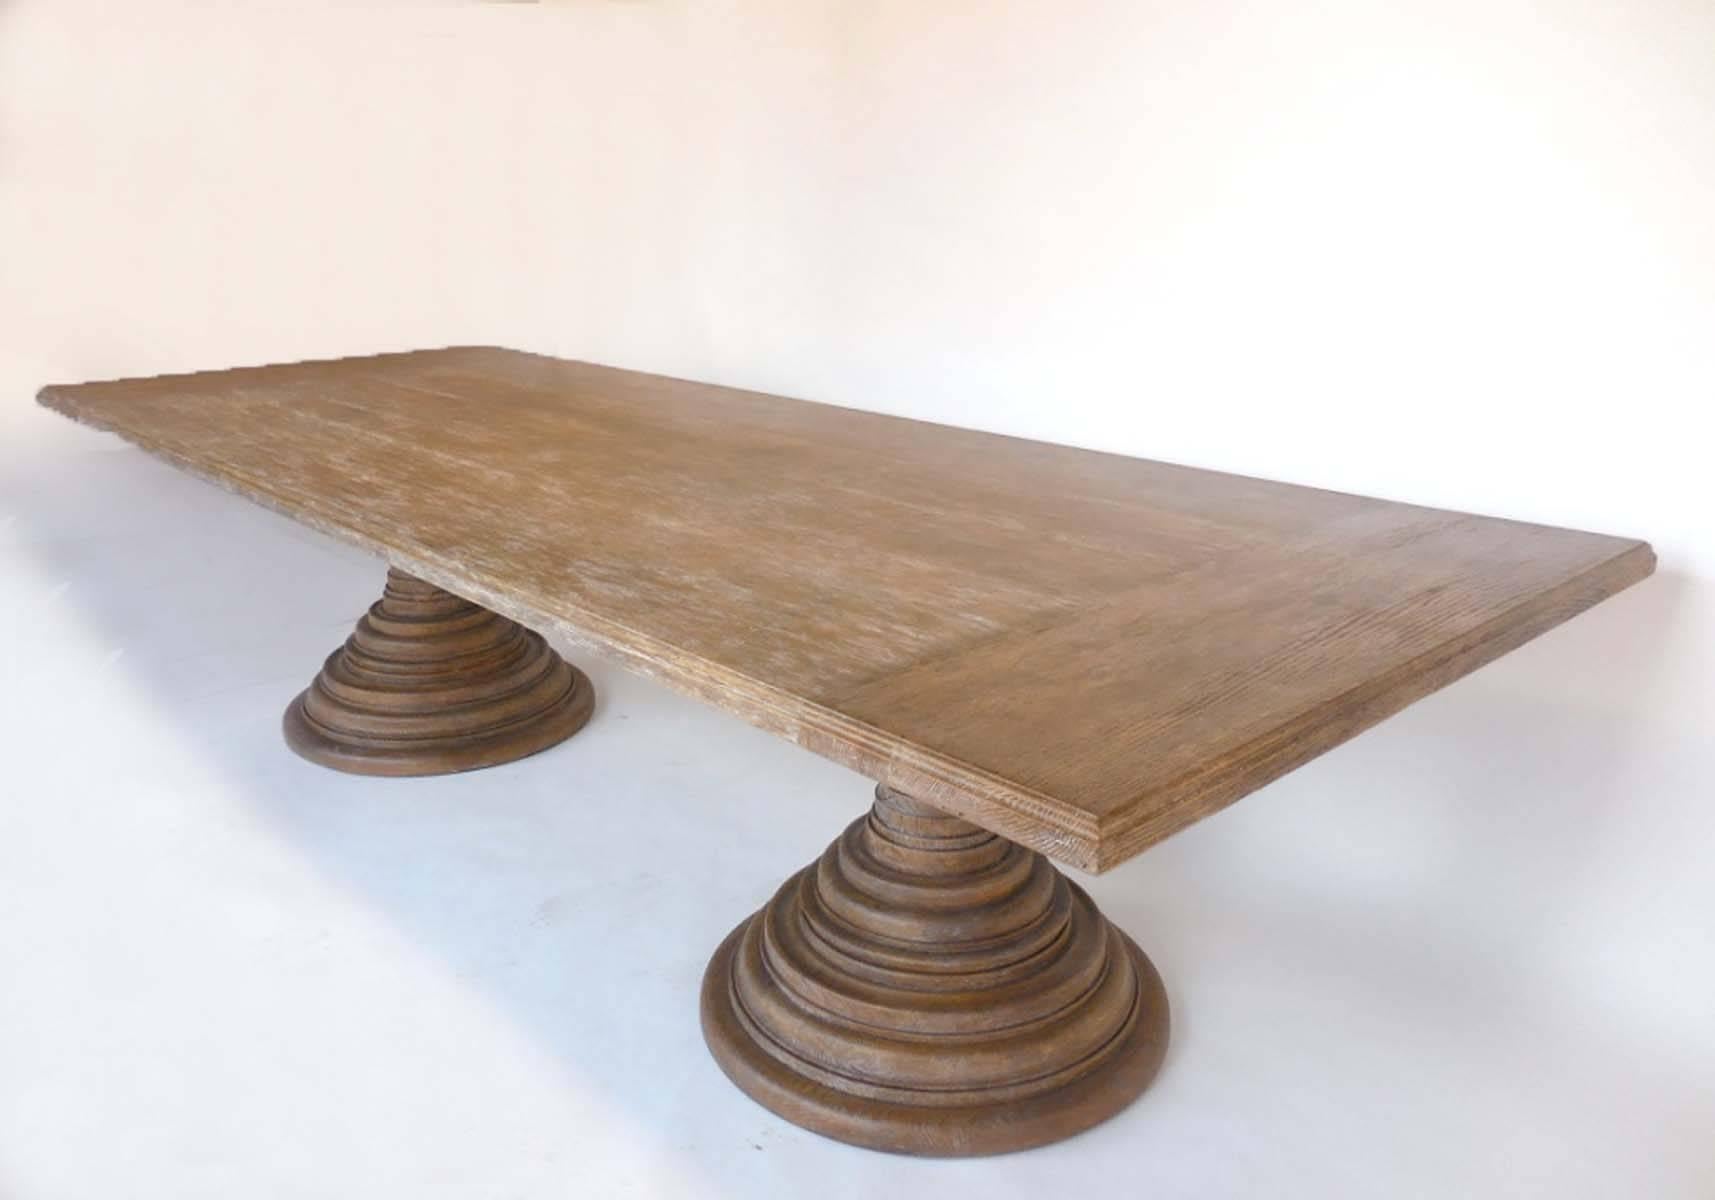 Custom beehive pedestal table in solid oak. Rectangular top is rift oak with an ogee edge. Finished in a cerused driftwood finish, open grain. This table can be made custom in any size and finish, in oak, mahogany or walnut.
Handmade in Los Angeles